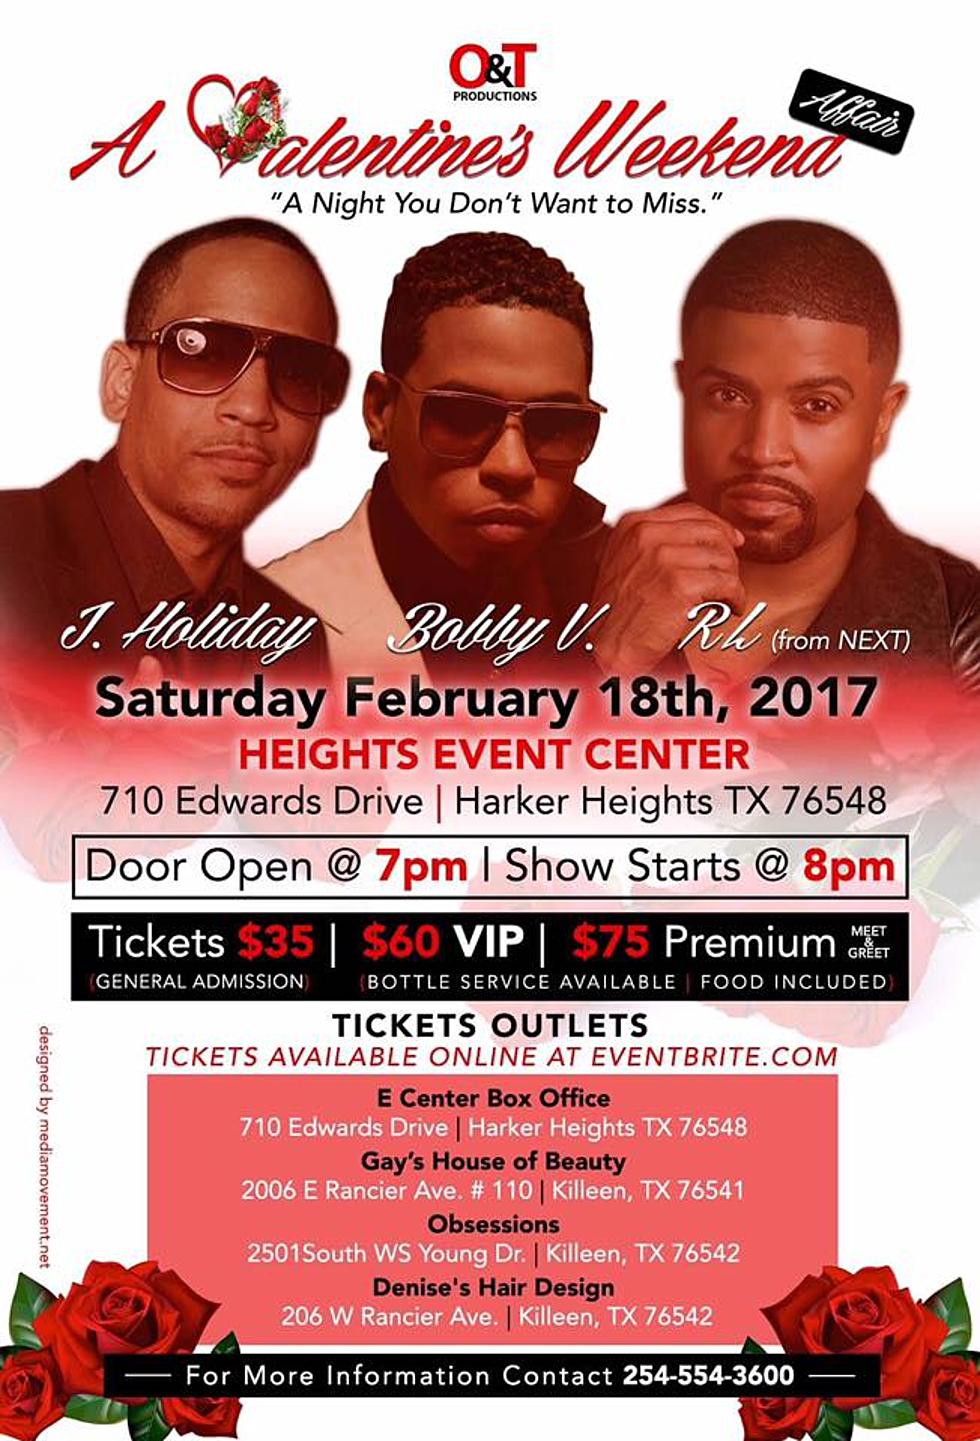 We’ve Got Tickets To See J. Holiday, Bobby V. & RL In Harker Heights